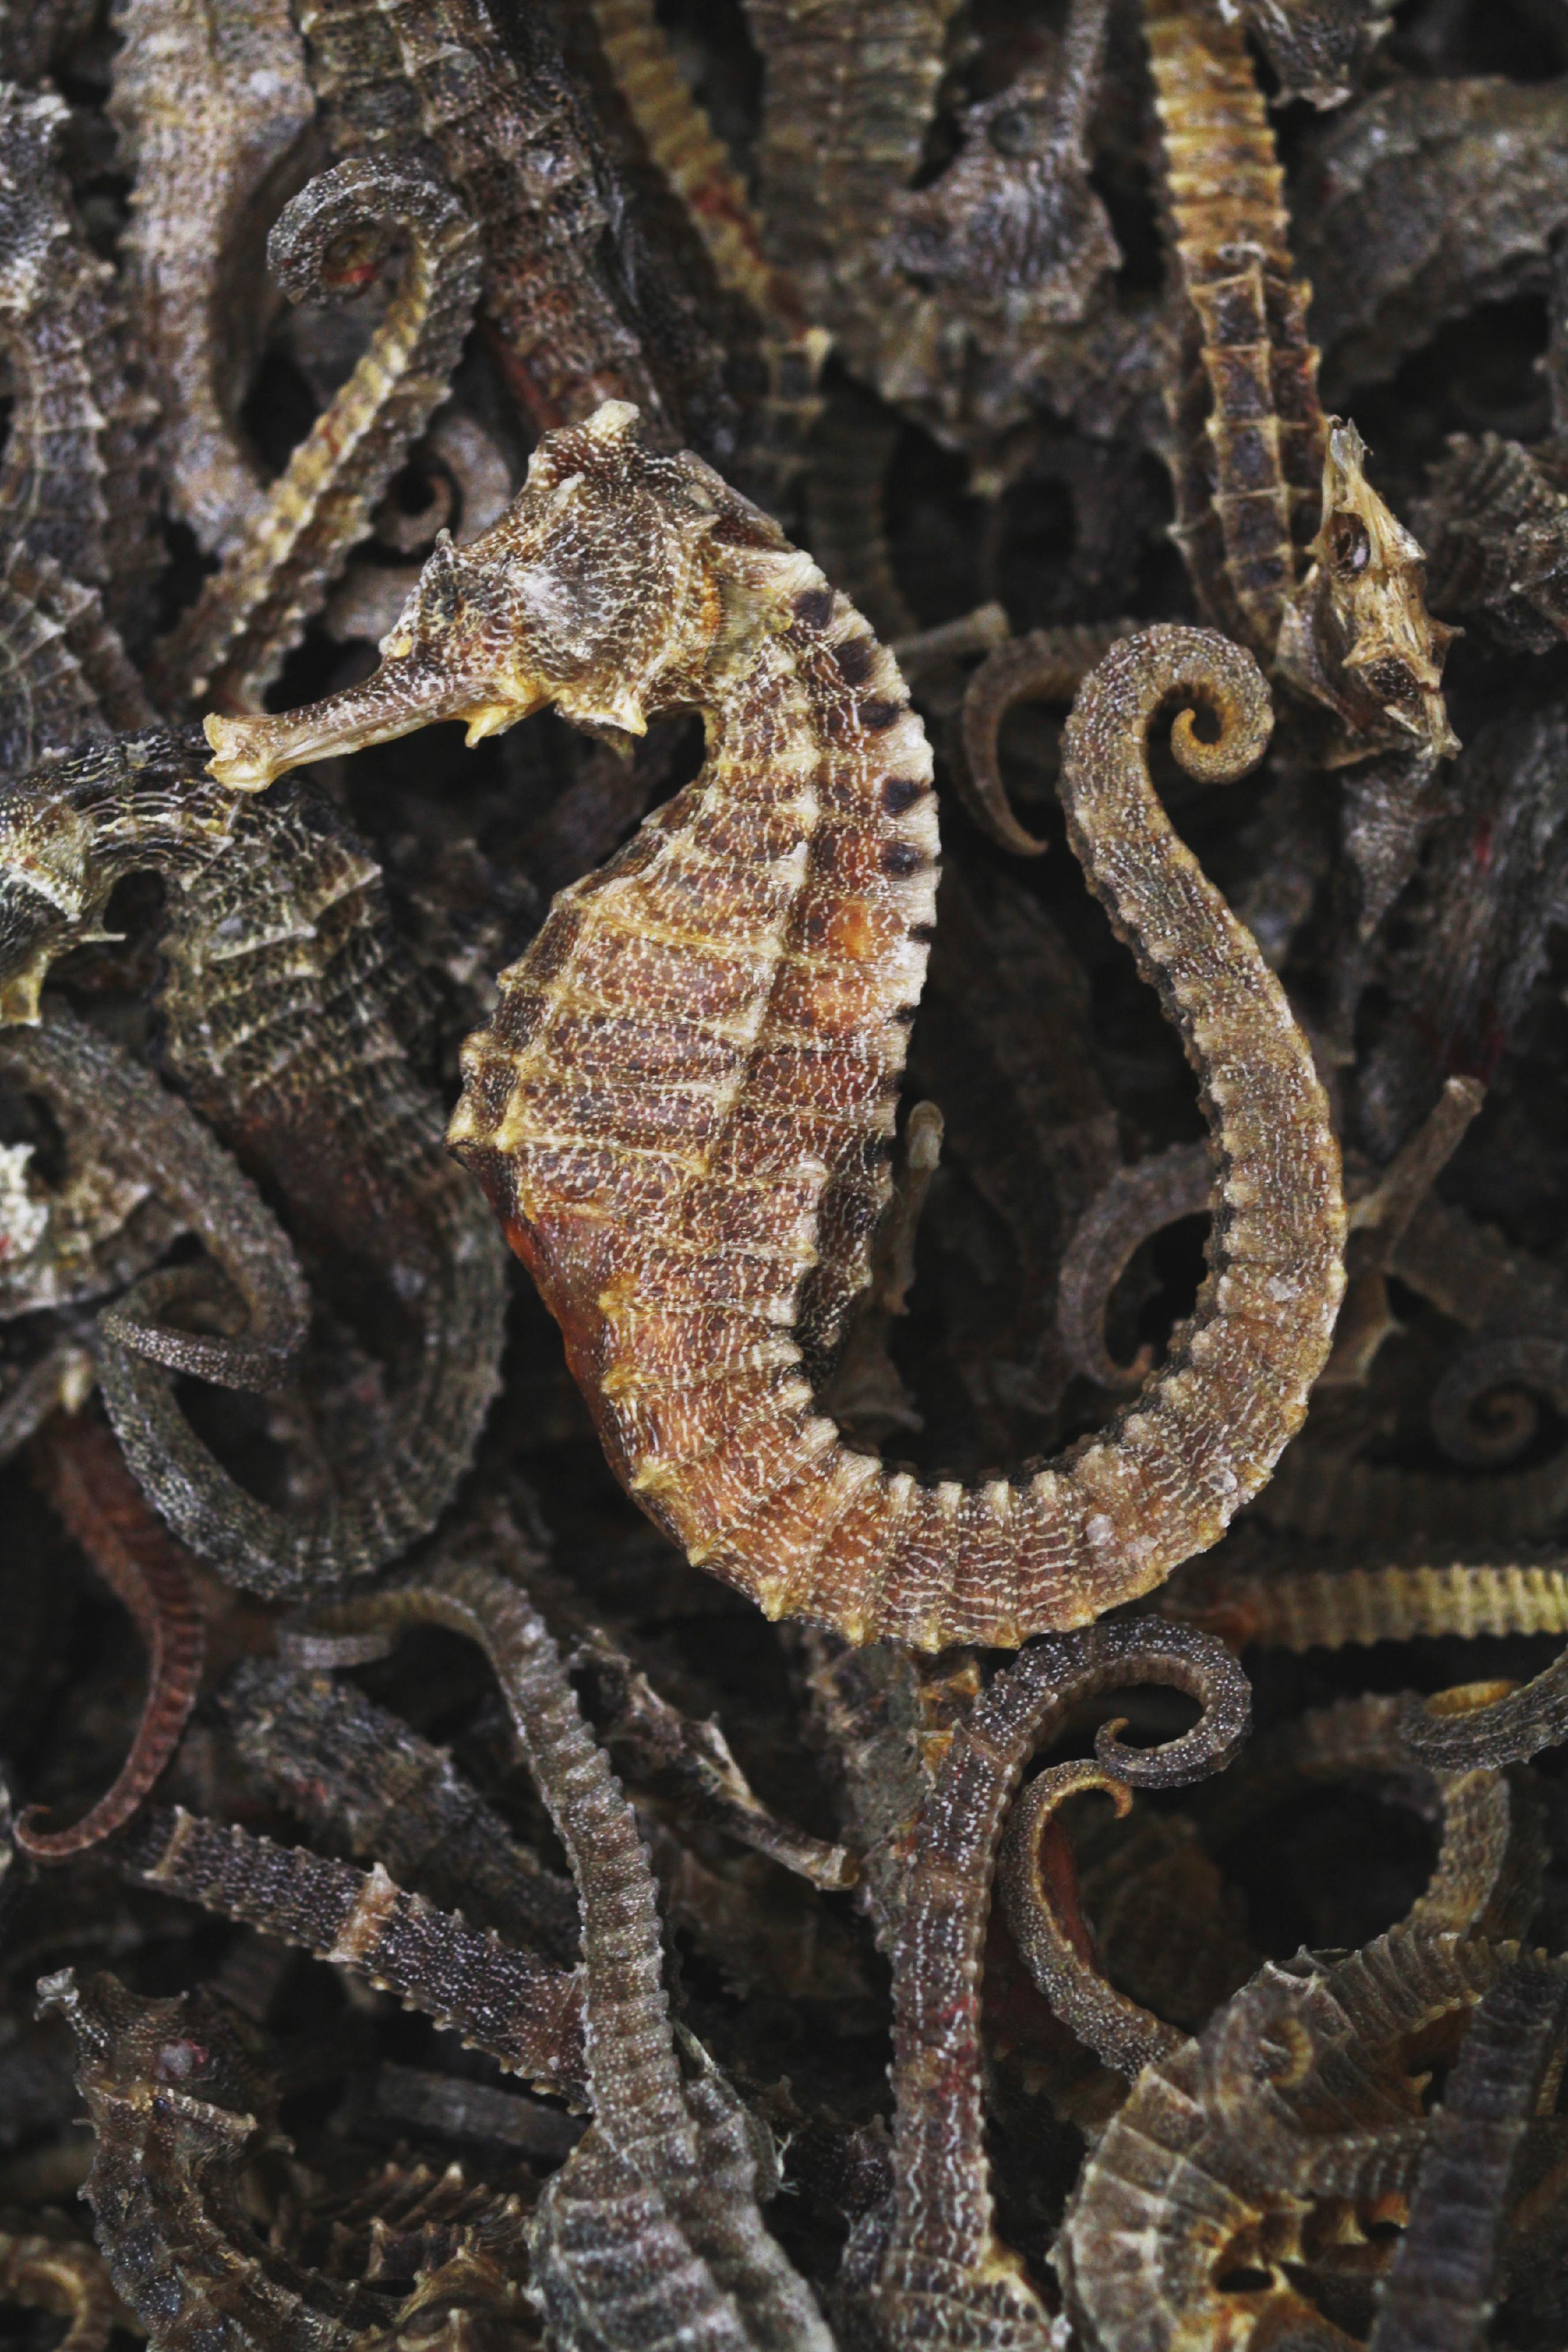 A Government spokesman today (February 1) reminded members of the public not to bring endangered species into Hong Kong without a required licence and not to import regulated food illegally when returning from visits to other places. Photo shows dried seahorses which are regulated under the Protection of Endangered Species of Animals and Plants Ordinance.